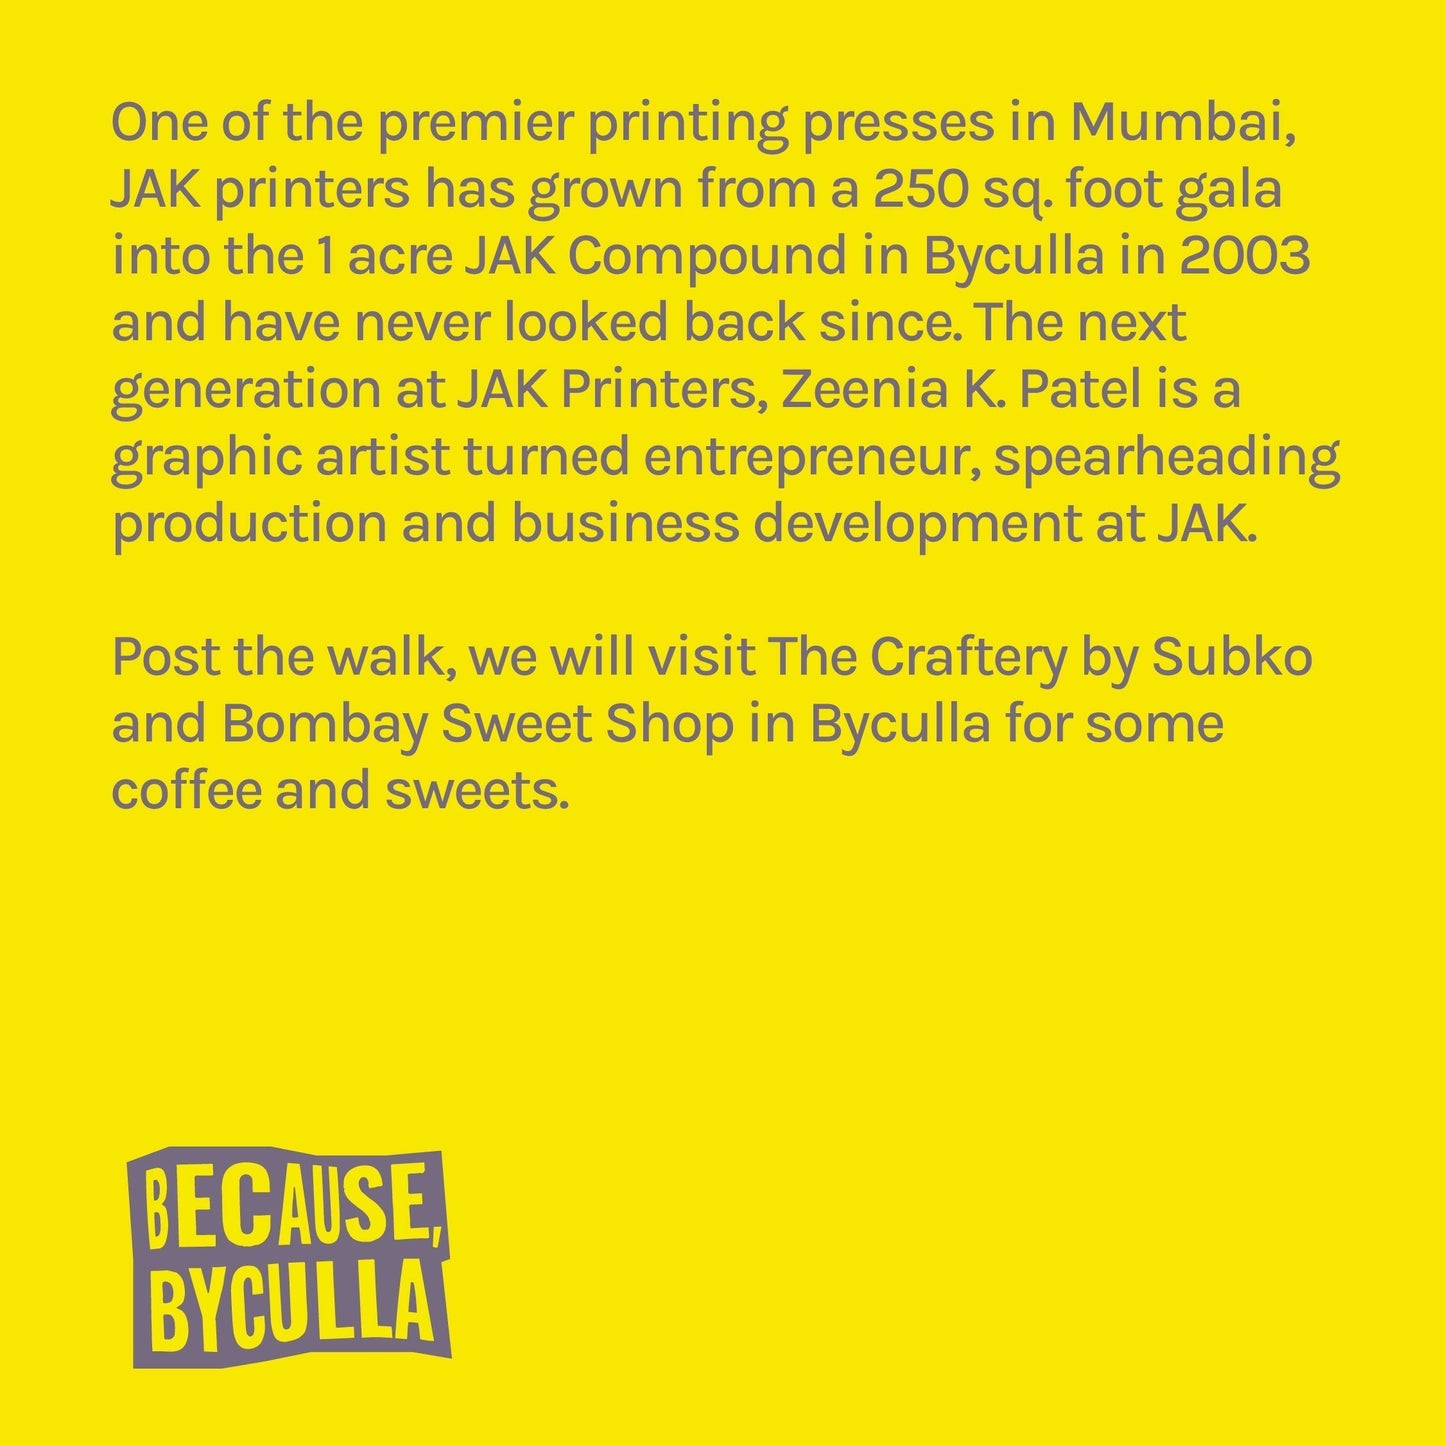 [June 10th] Because Byculla - Sneak Peak into a Specialty Printing Press with Zeenia